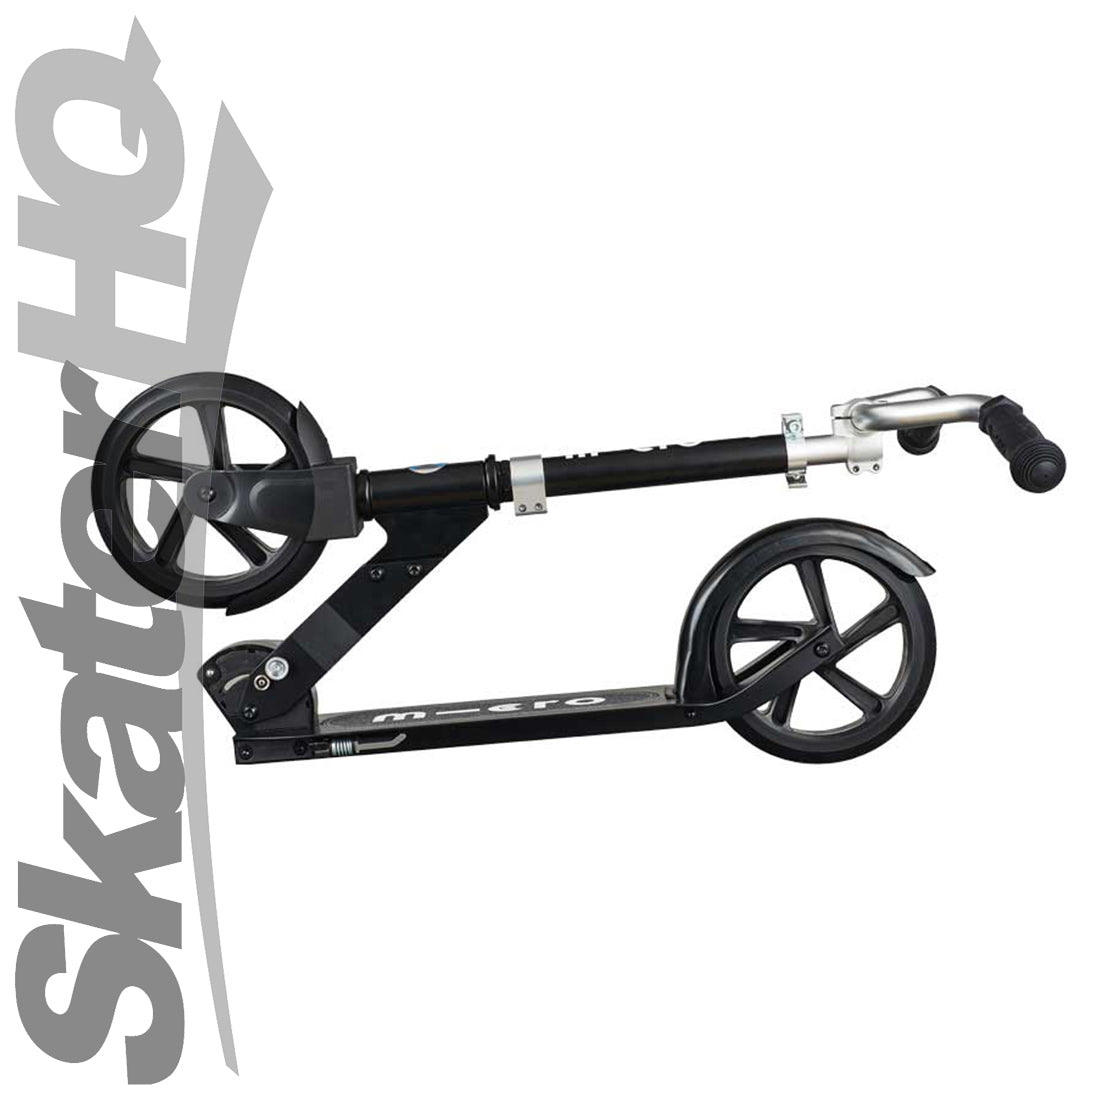 Micro Cruiser Scooter - Black Scooter Completes Rec